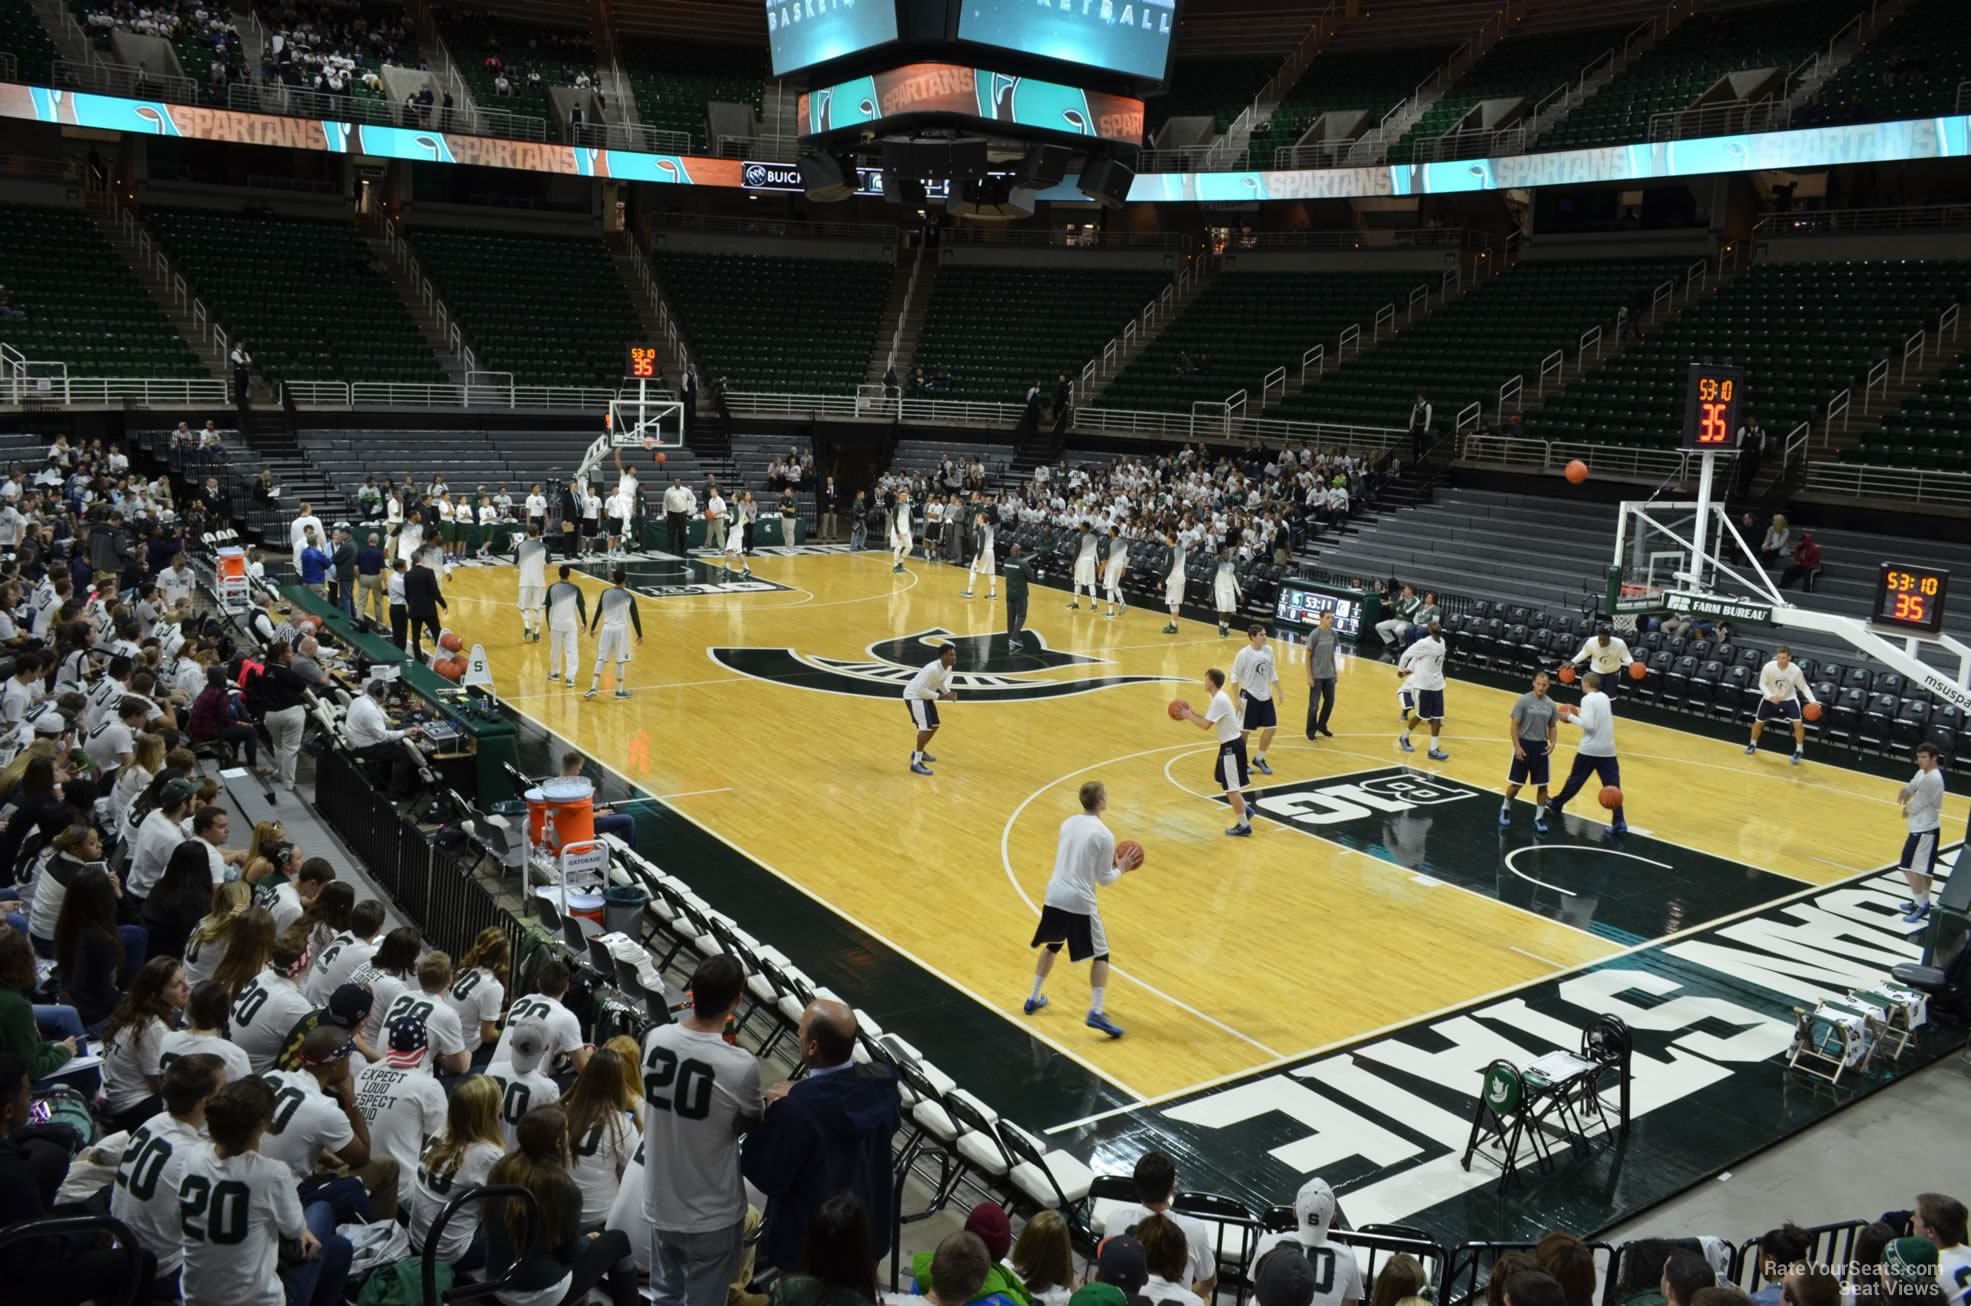 section 108, row 13 seat view  - breslin center